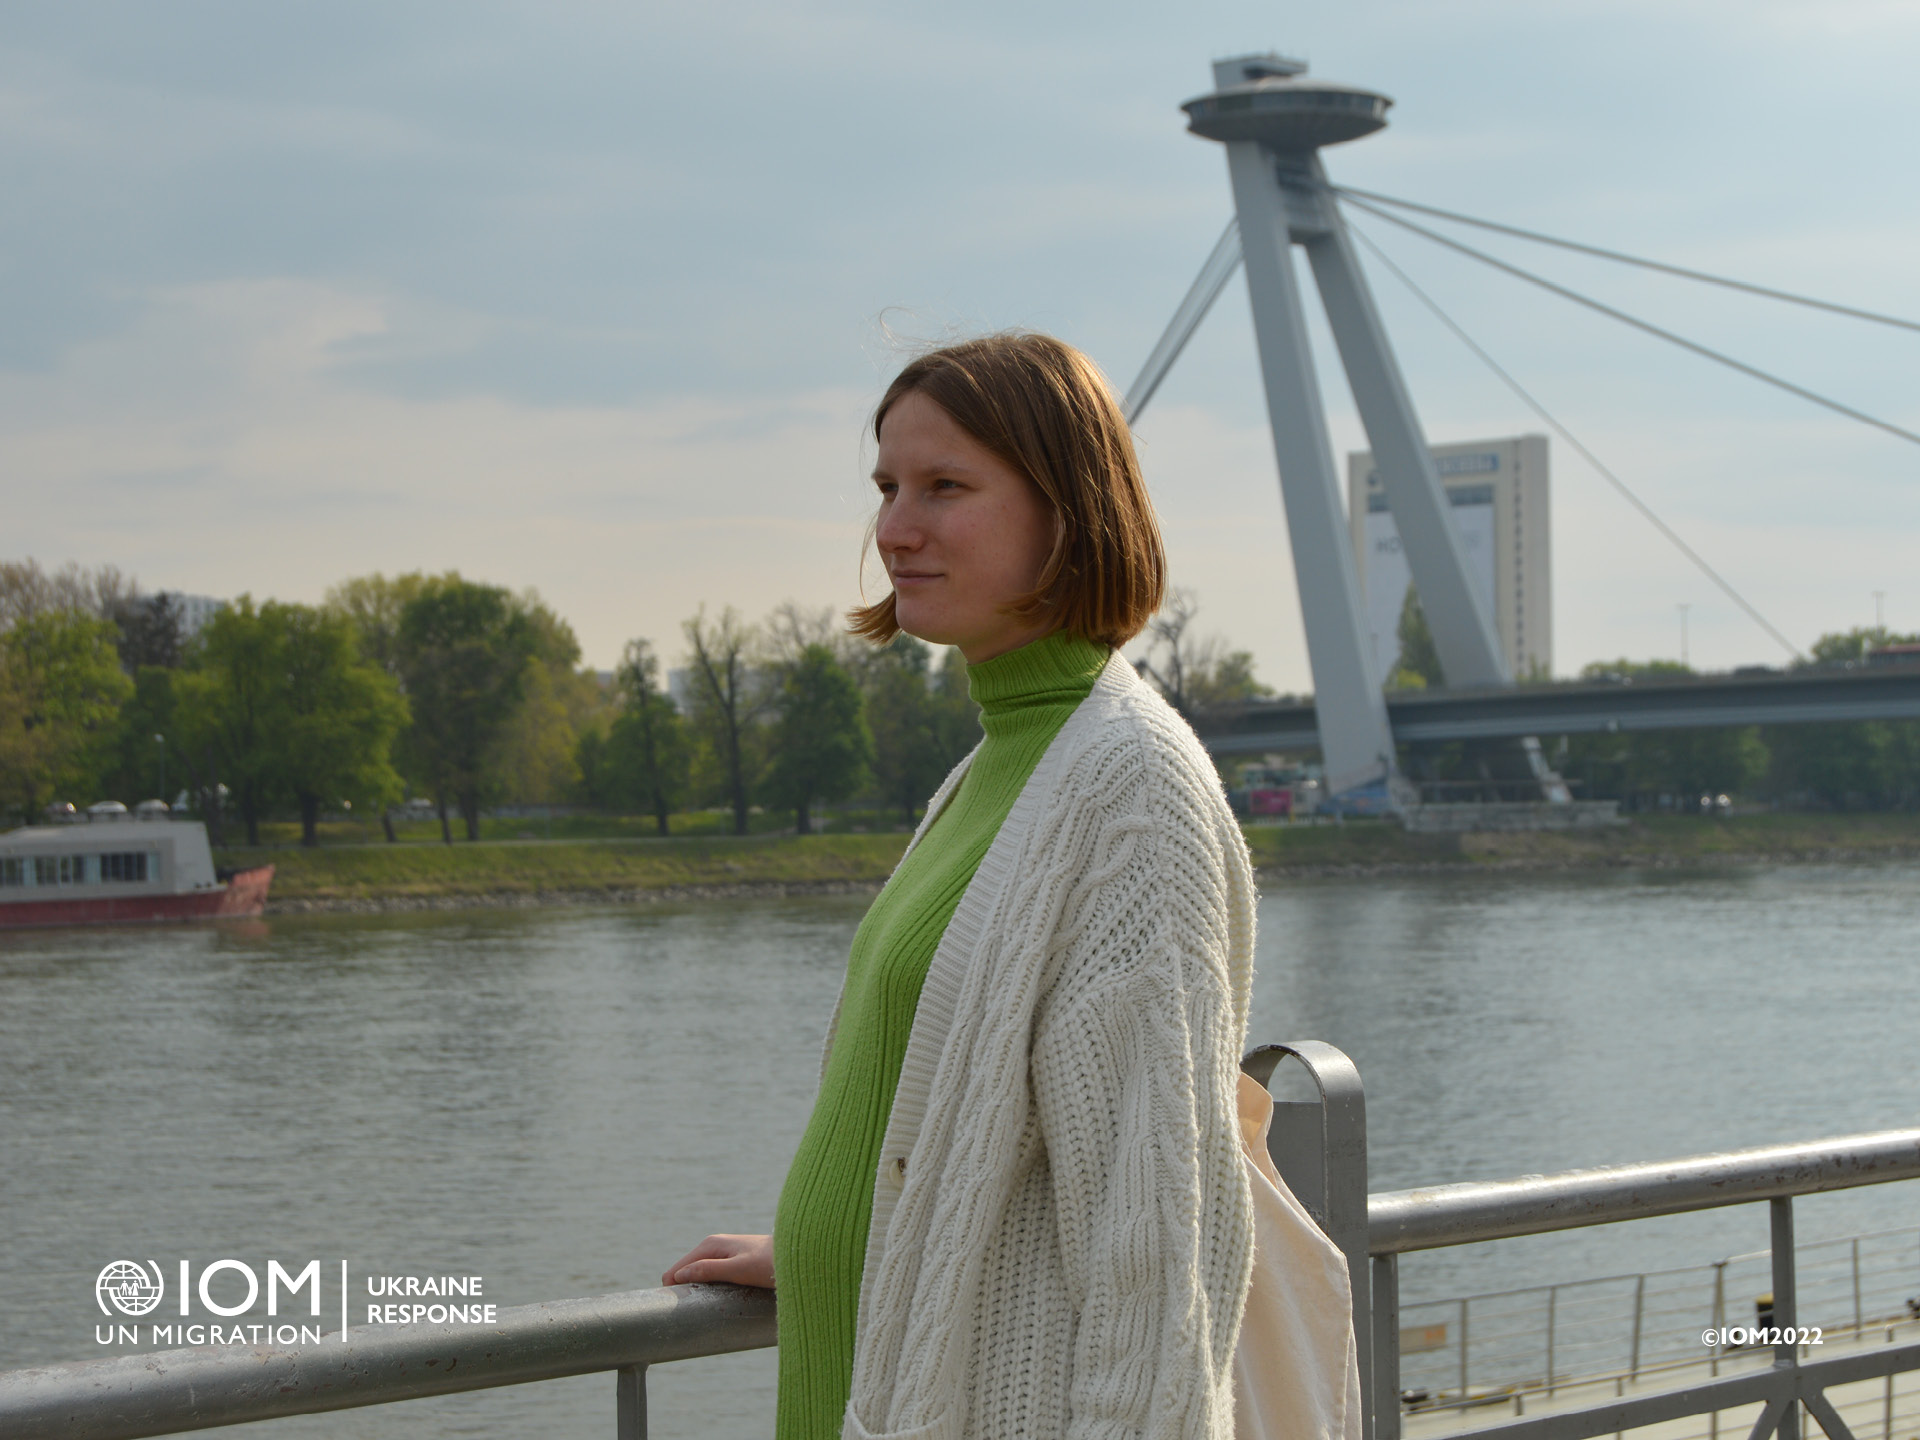 While in Bratislava, Mariia enjoyed walking along the Danube River, which reminded her of the Dnipro River back home. “One of the most valuable lessons I learned is to start valuing everything in life; every hour together.” Photo: © IOM/Barbora Kratochvilova and Kristina Tokac.